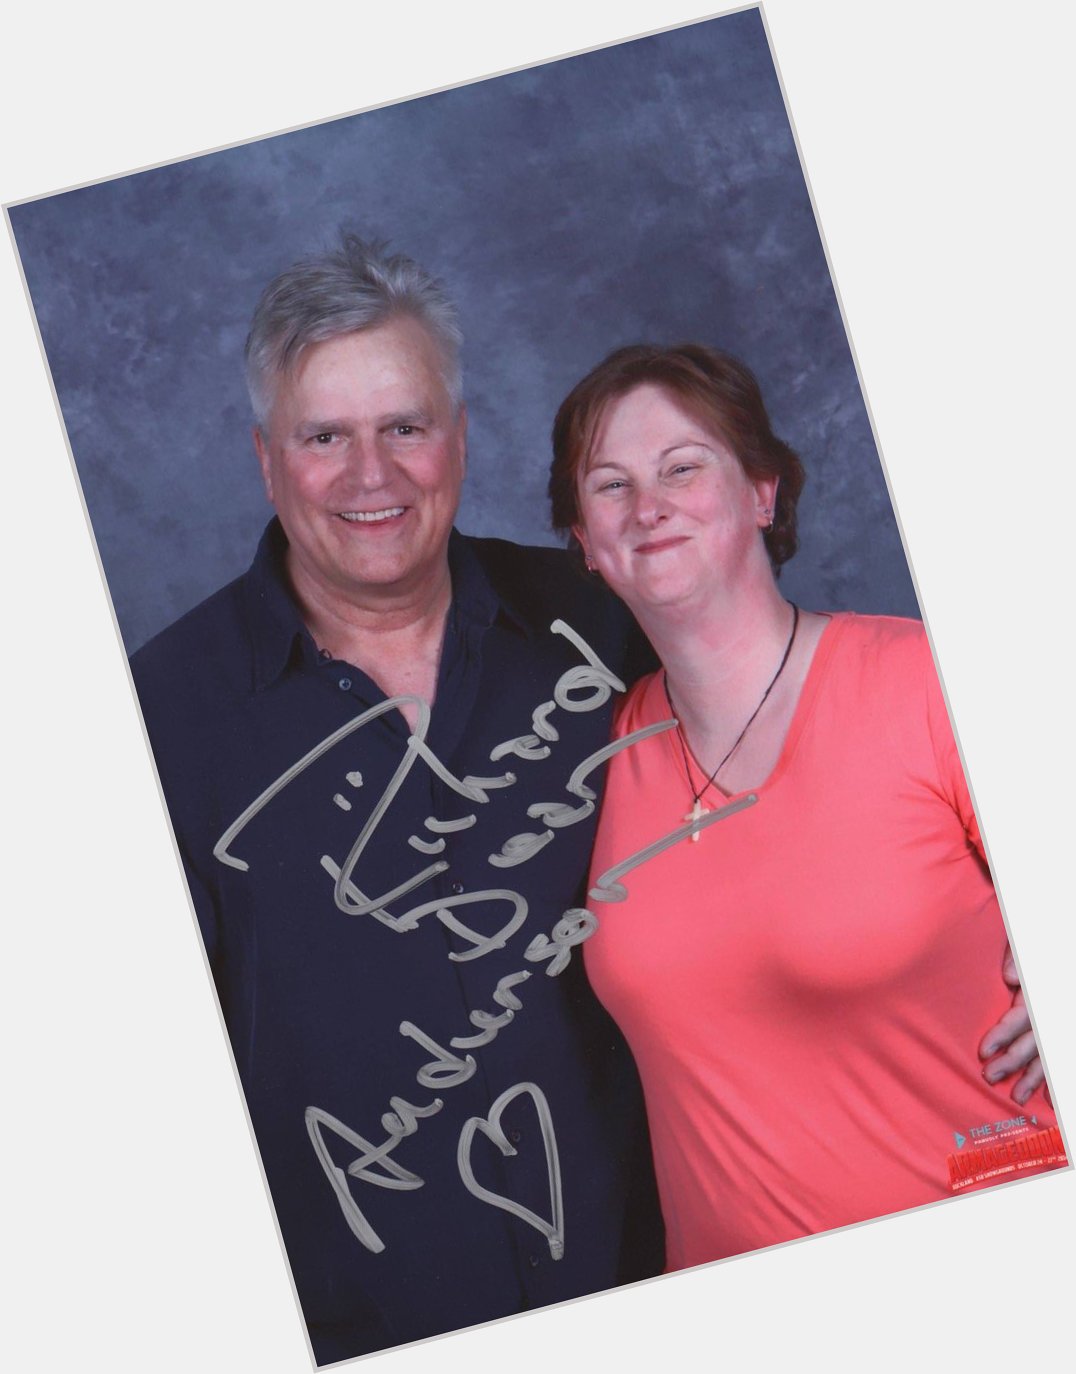 Happy birthday to one of my favourite actors! Richard Dean Anderson! 